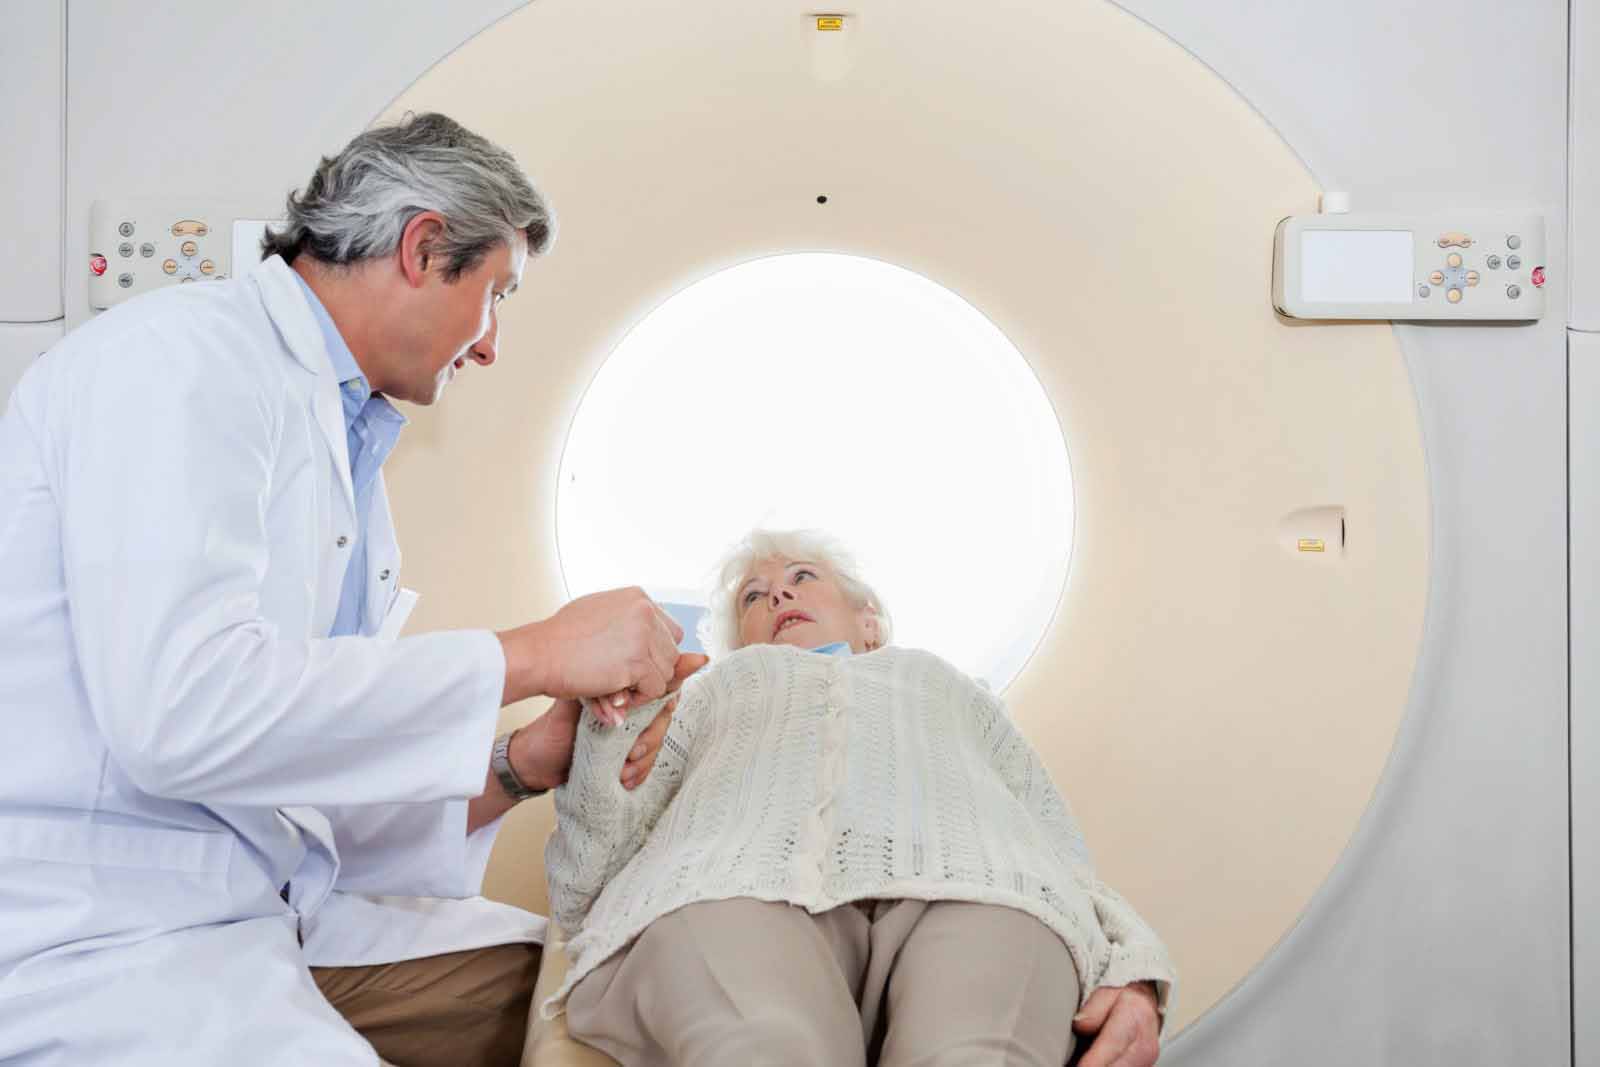 What Is Radiation Treatment For Cancer?